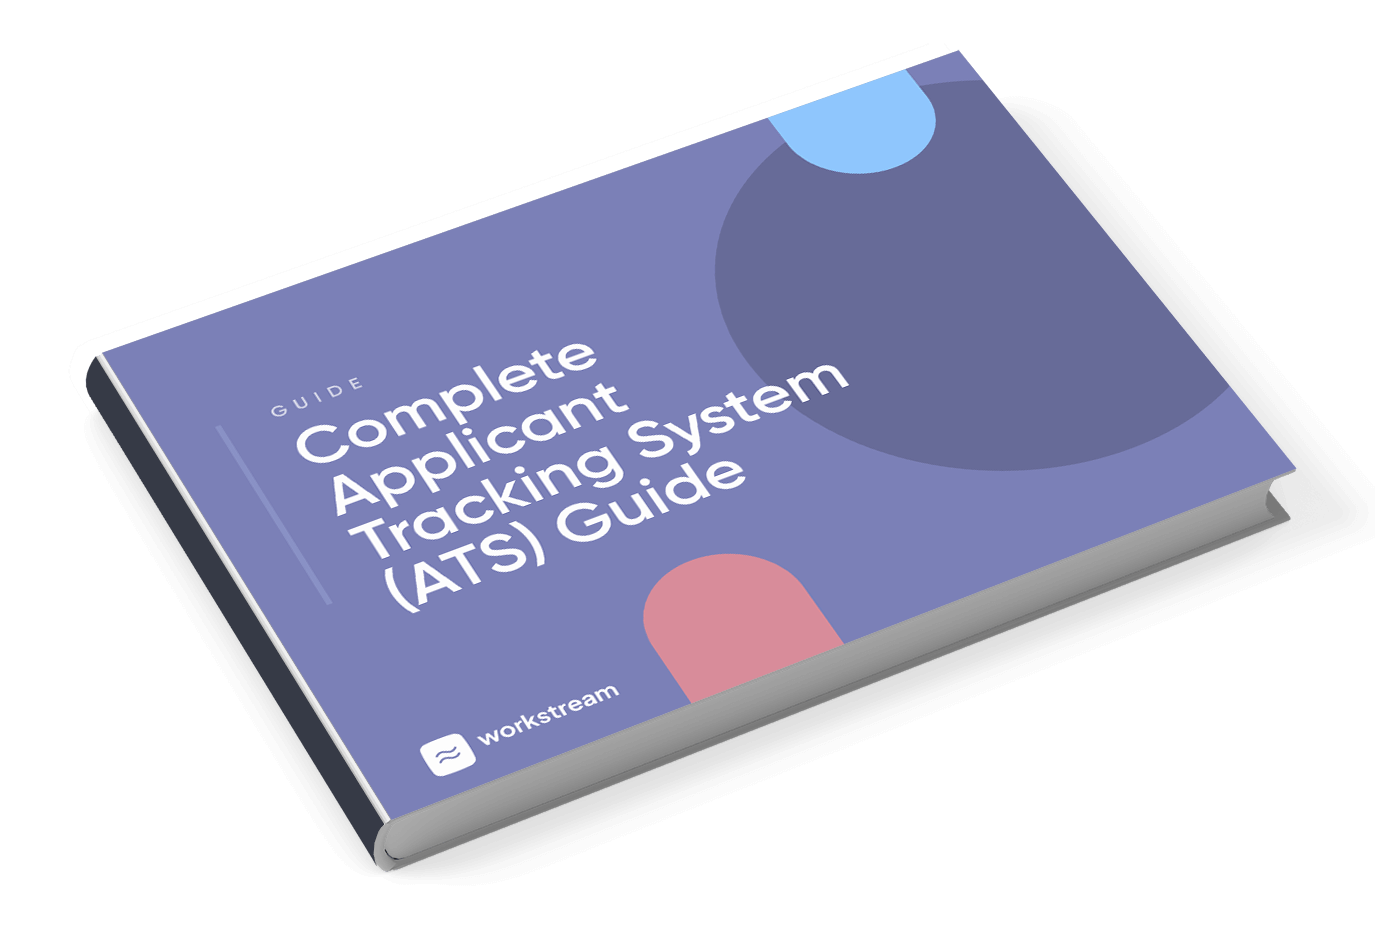 complete-applicant-tracking-system-guide-mock